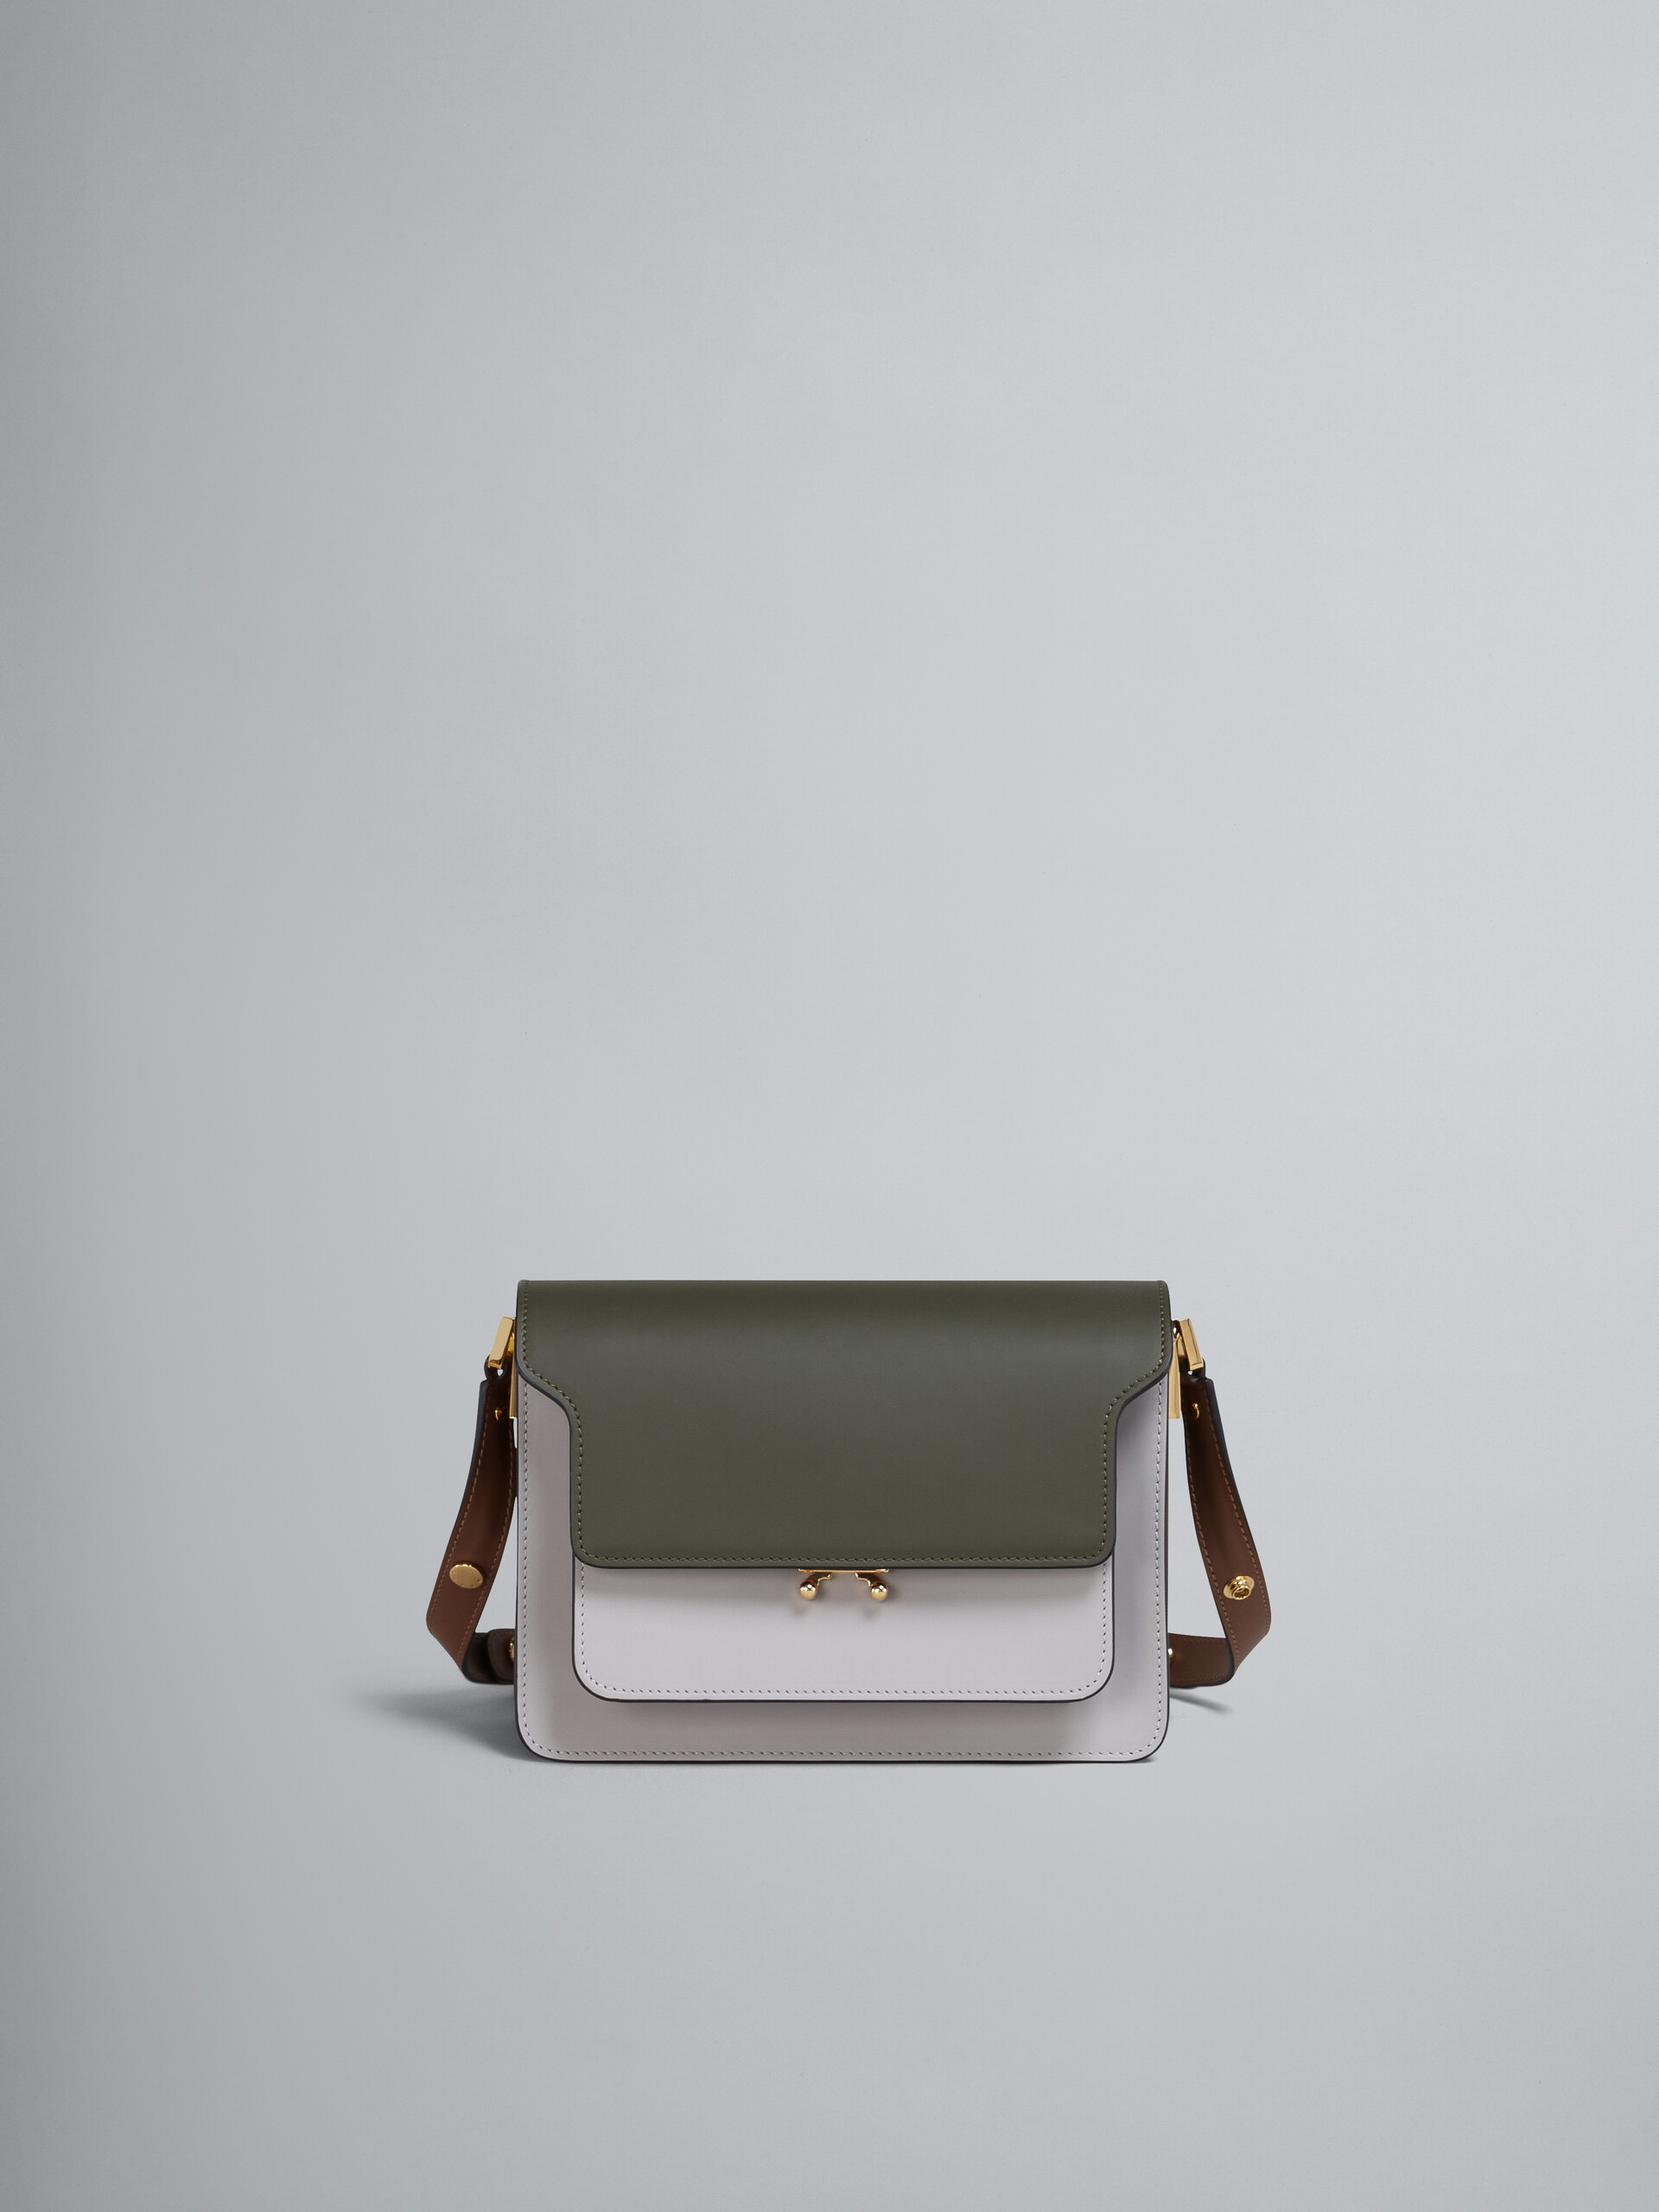 TRUNK medium bag in green grey and brown leather - Shoulder Bags - Image 1